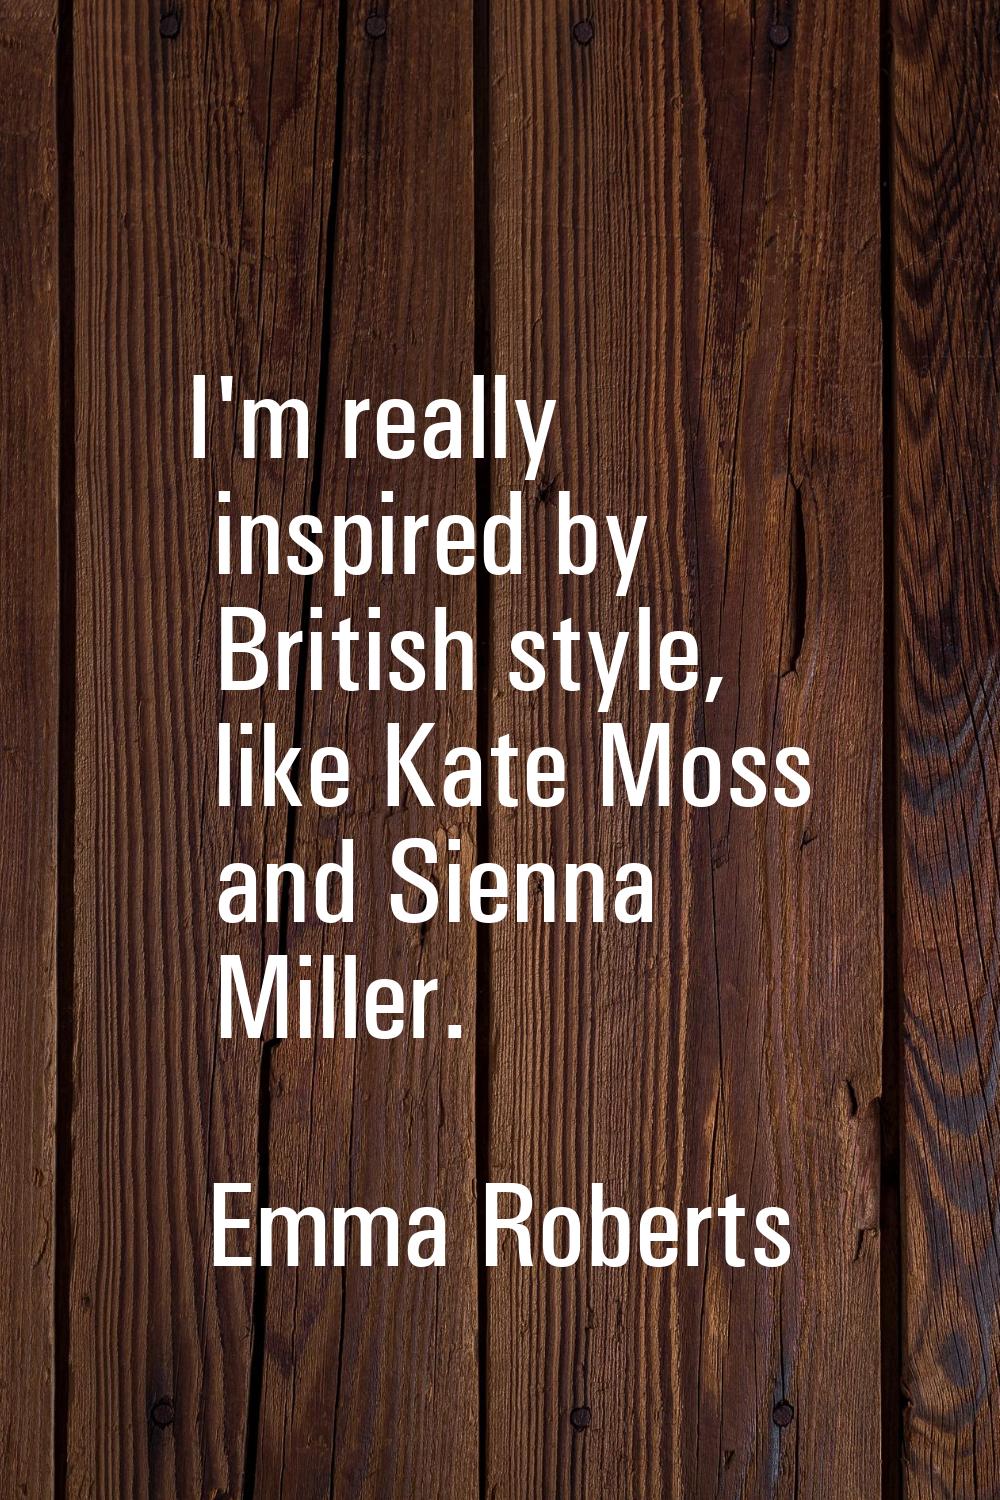 I'm really inspired by British style, like Kate Moss and Sienna Miller.